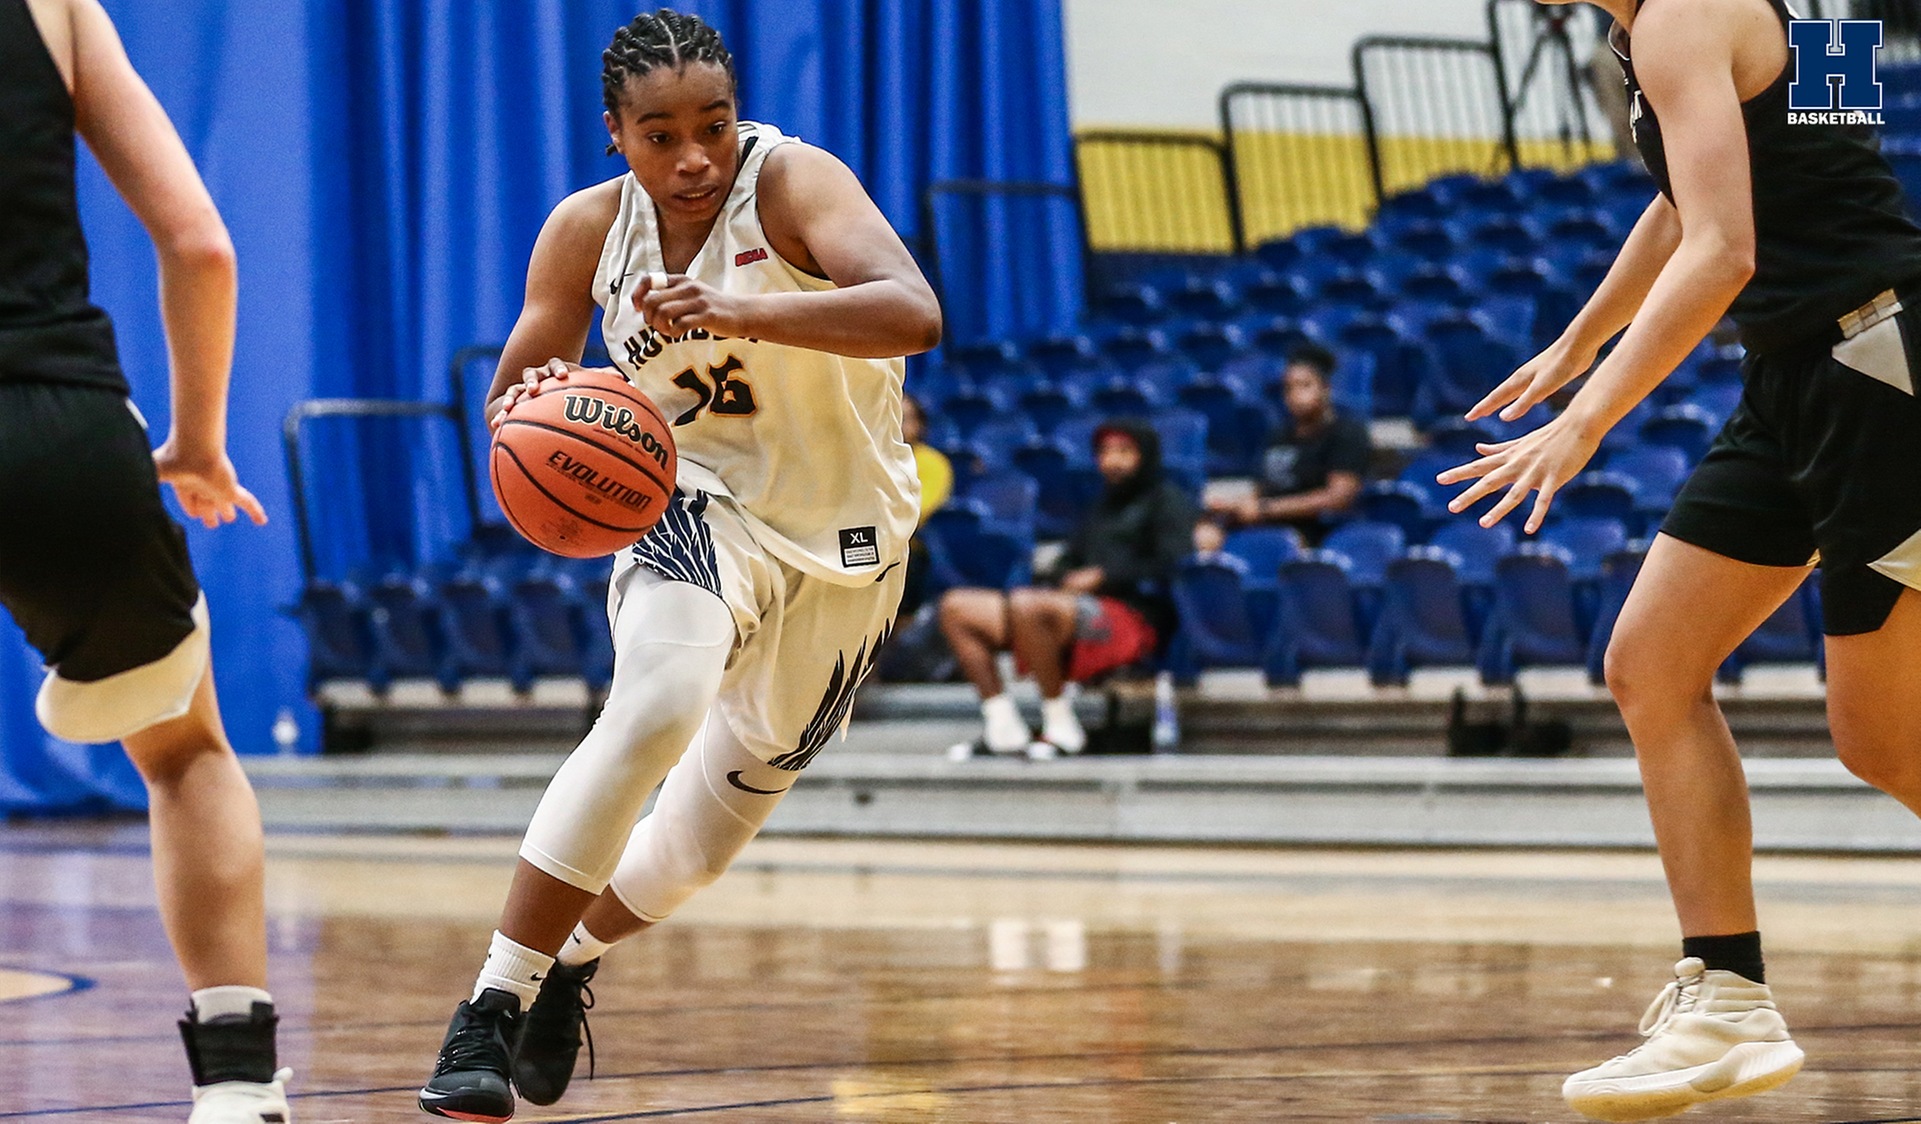 Women's Basketball Opens Season With Win at Redeemer, 98-69